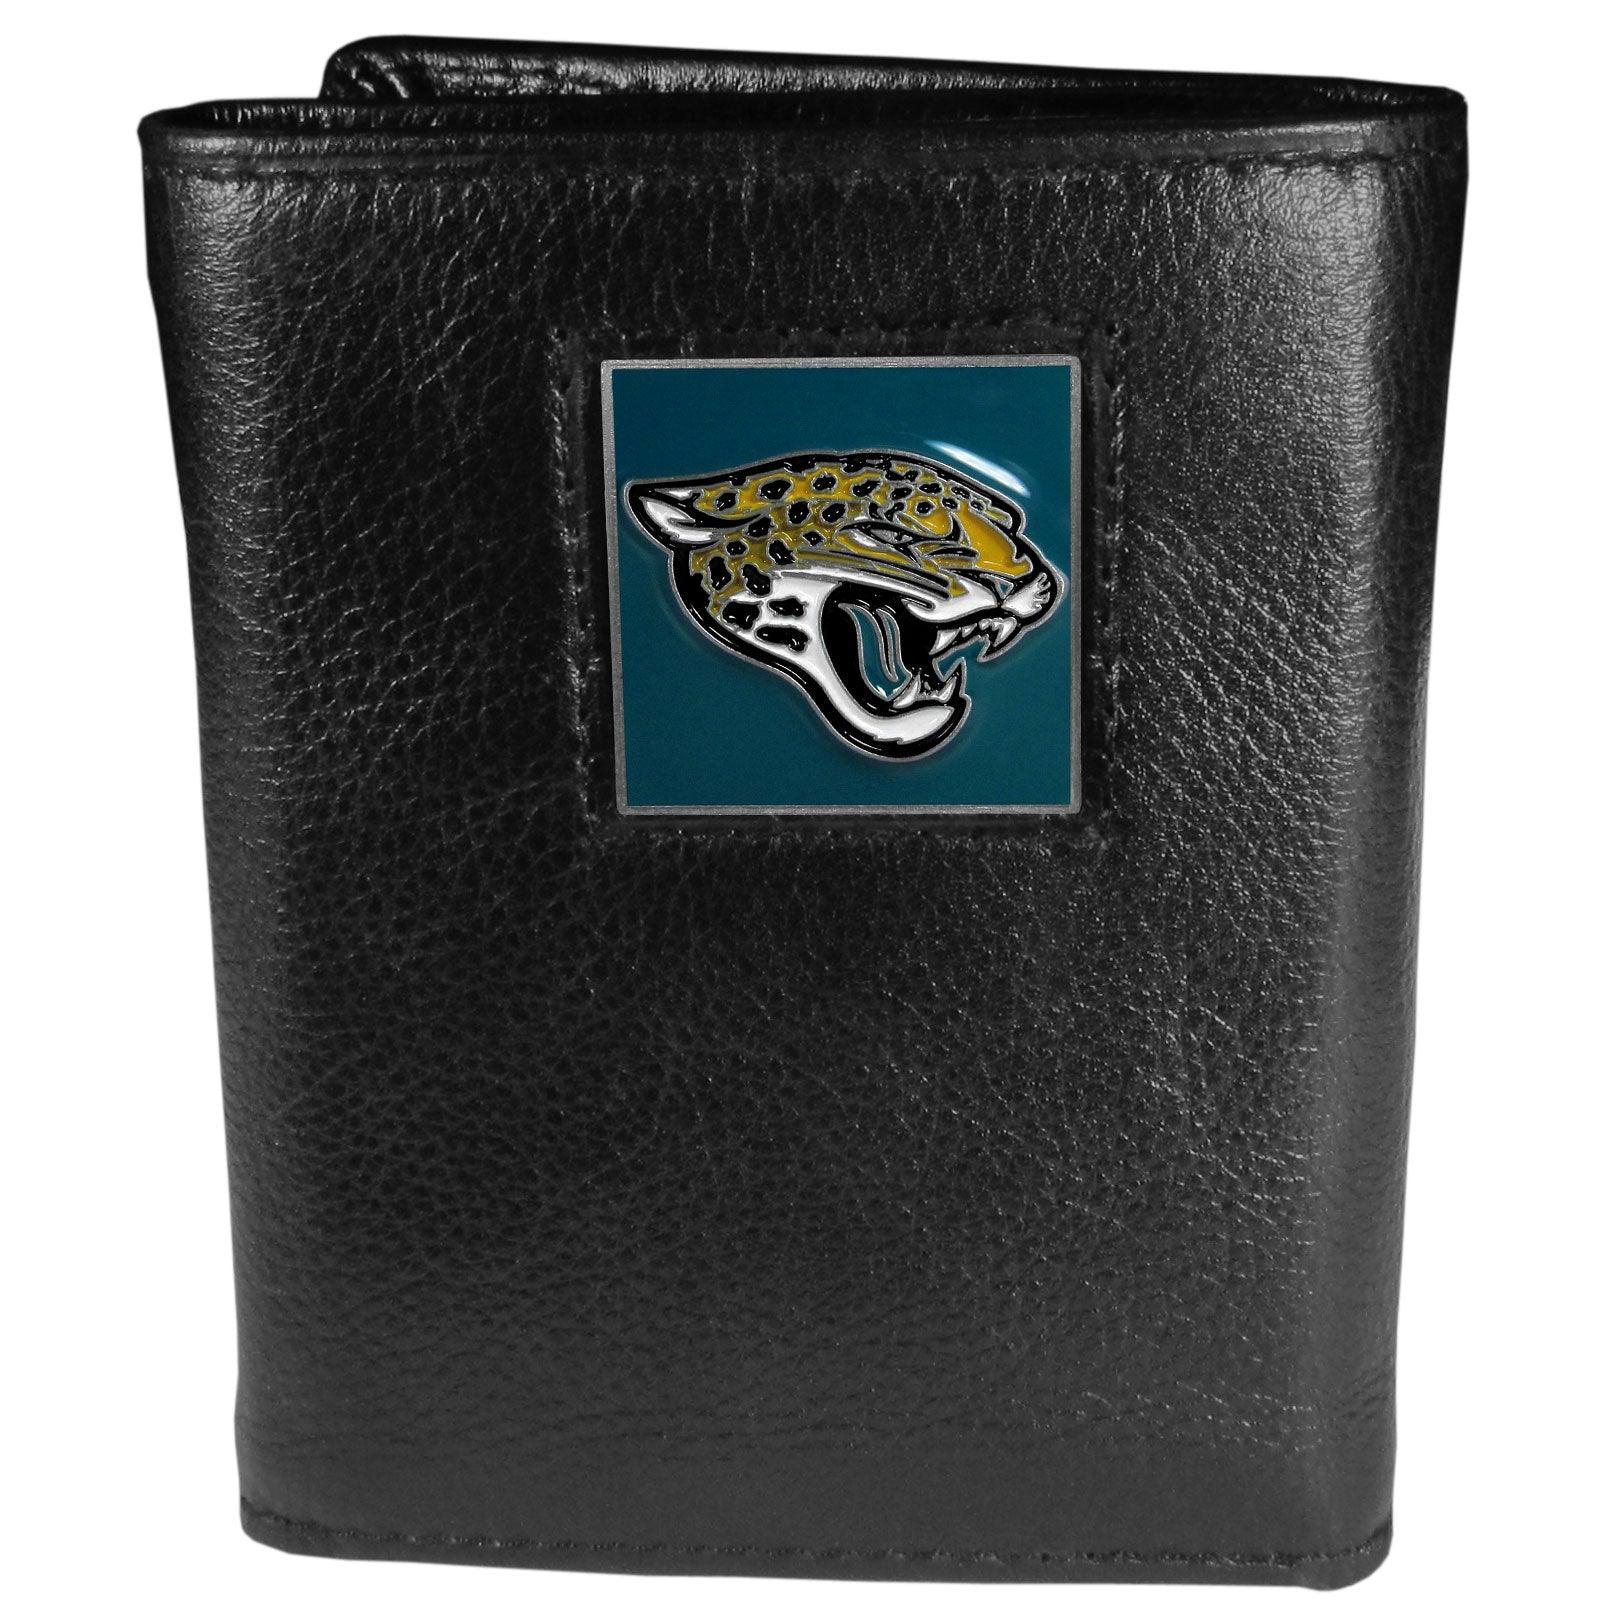 Jacksonville Jaguars Deluxe Leather Tri-fold Wallet Packaged in Gift Box - Flyclothing LLC